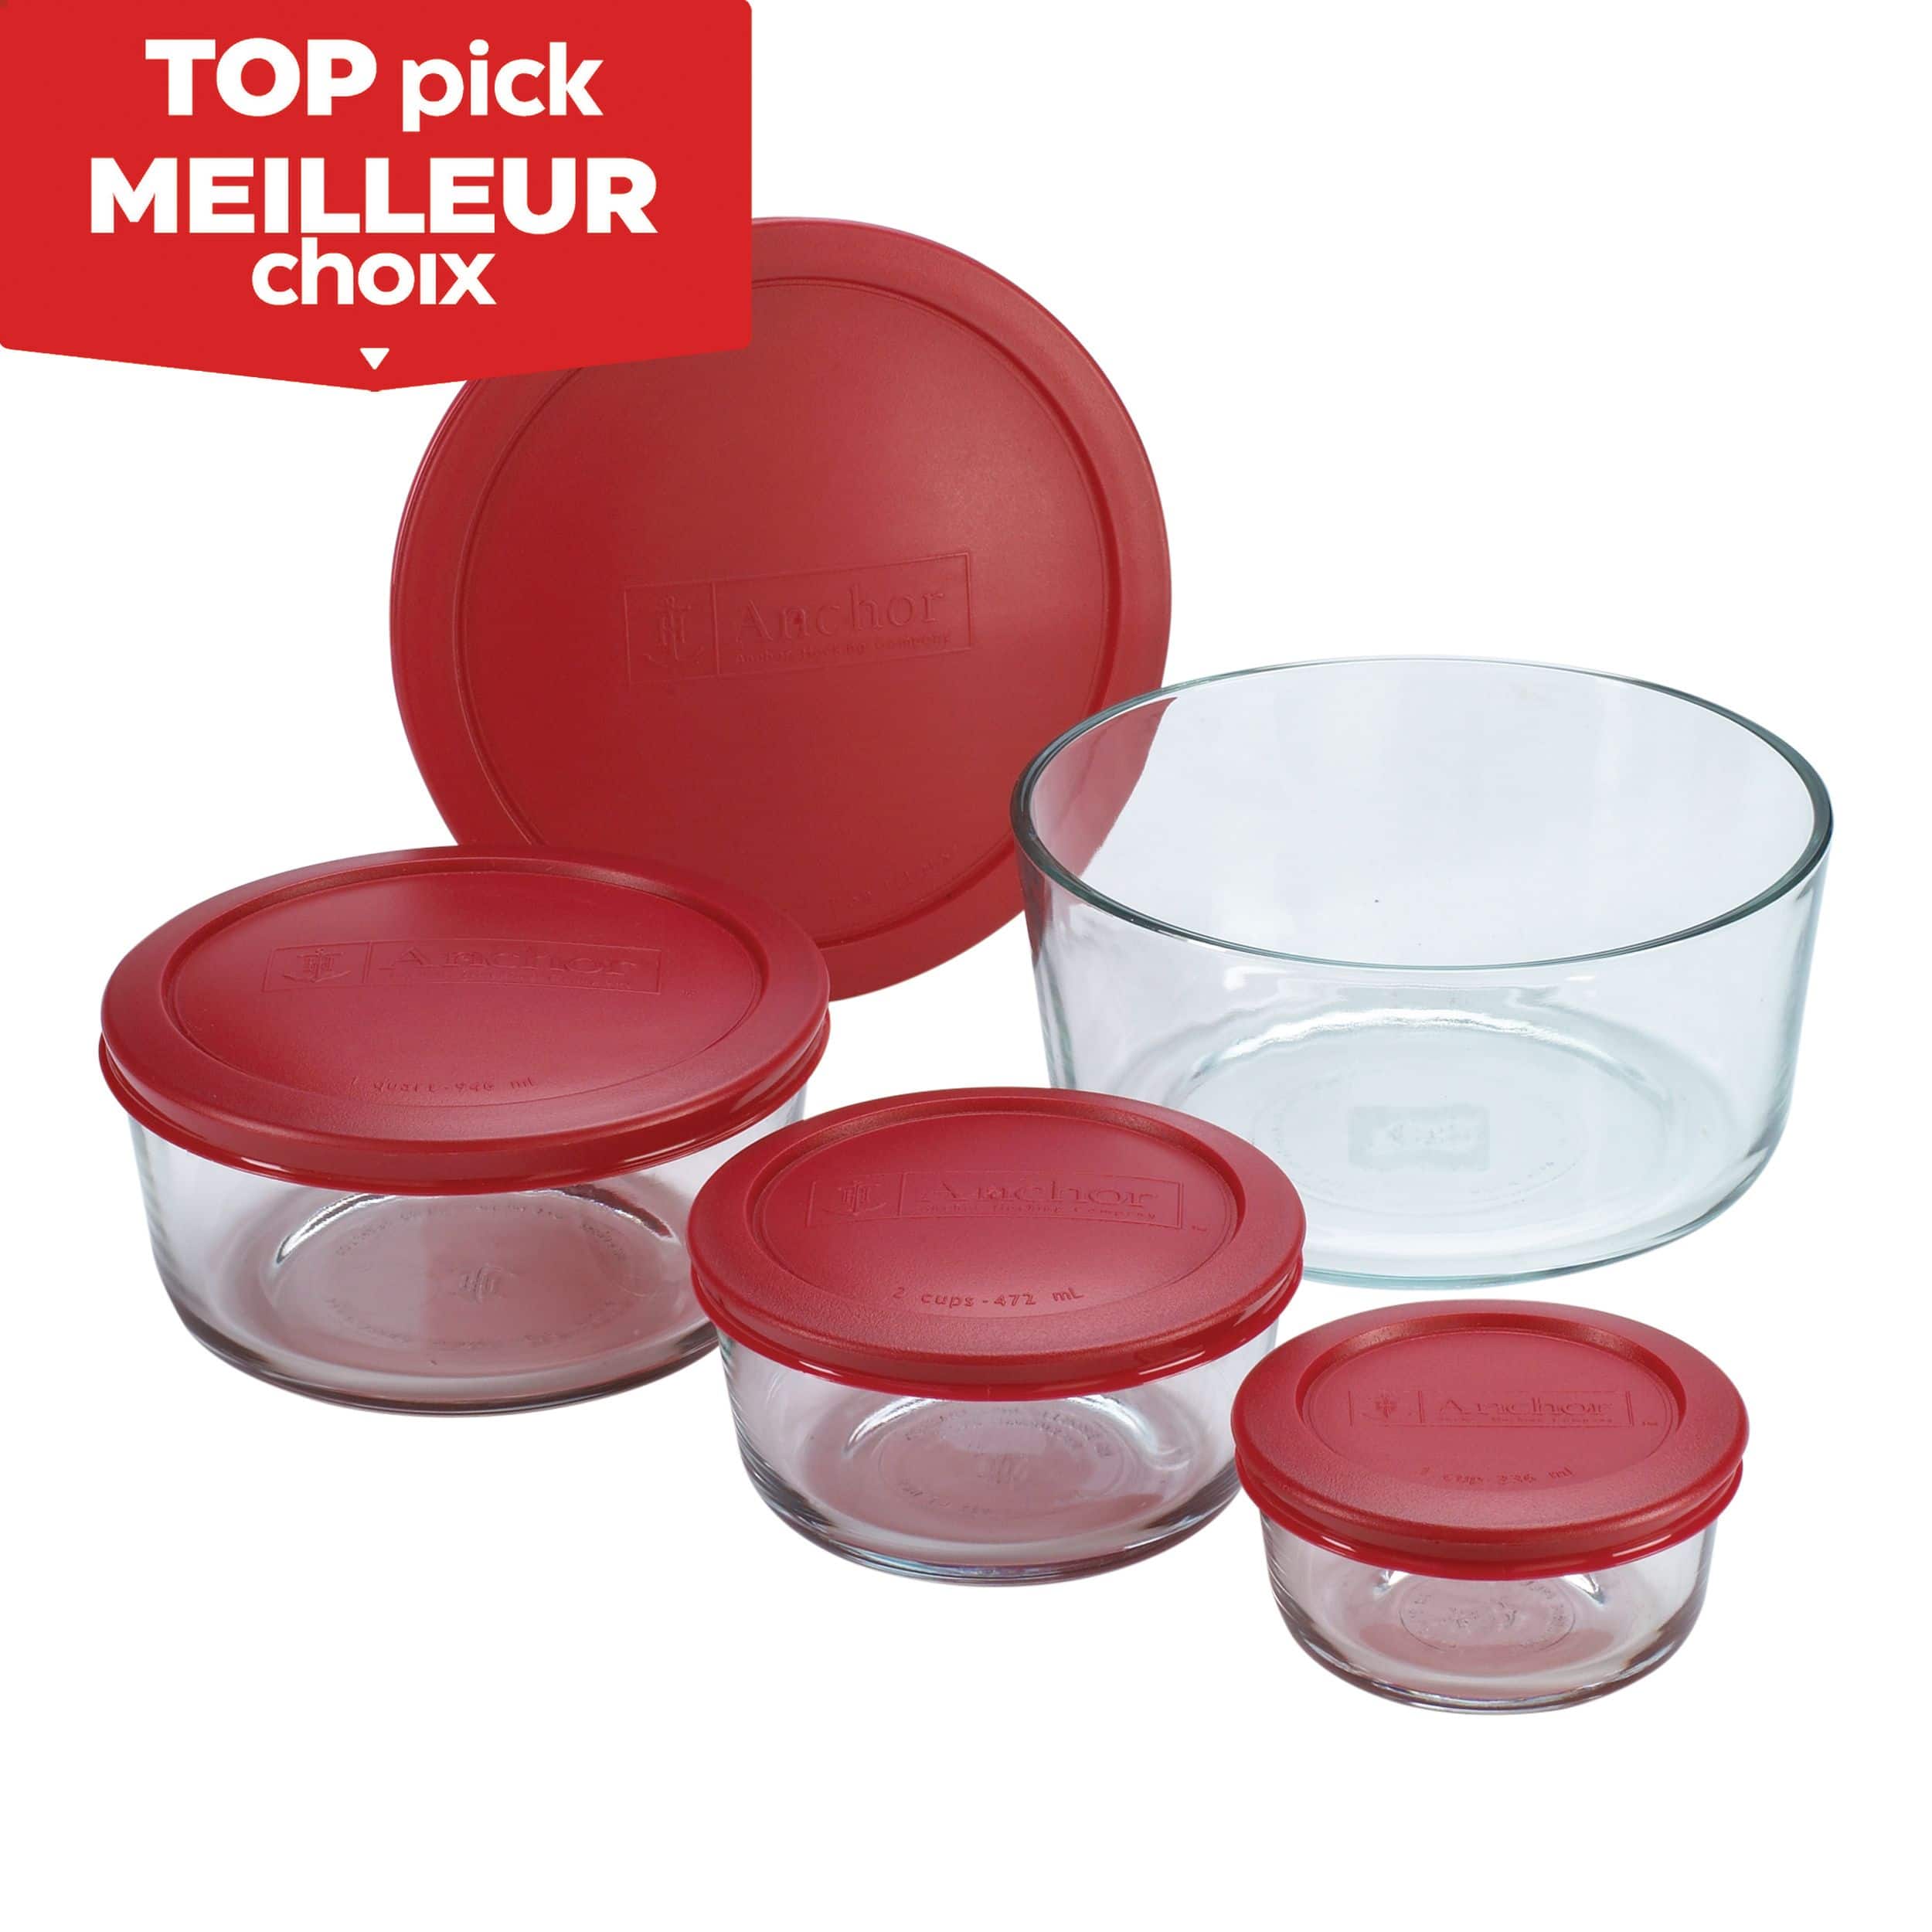 https://media-www.canadiantire.ca/product/living/kitchen/bakeware-baking-prep/0422024/8-piece-round-glass-storage-63f9a052-1184-47e4-b64a-35a456d7d507-jpgrendition.jpg